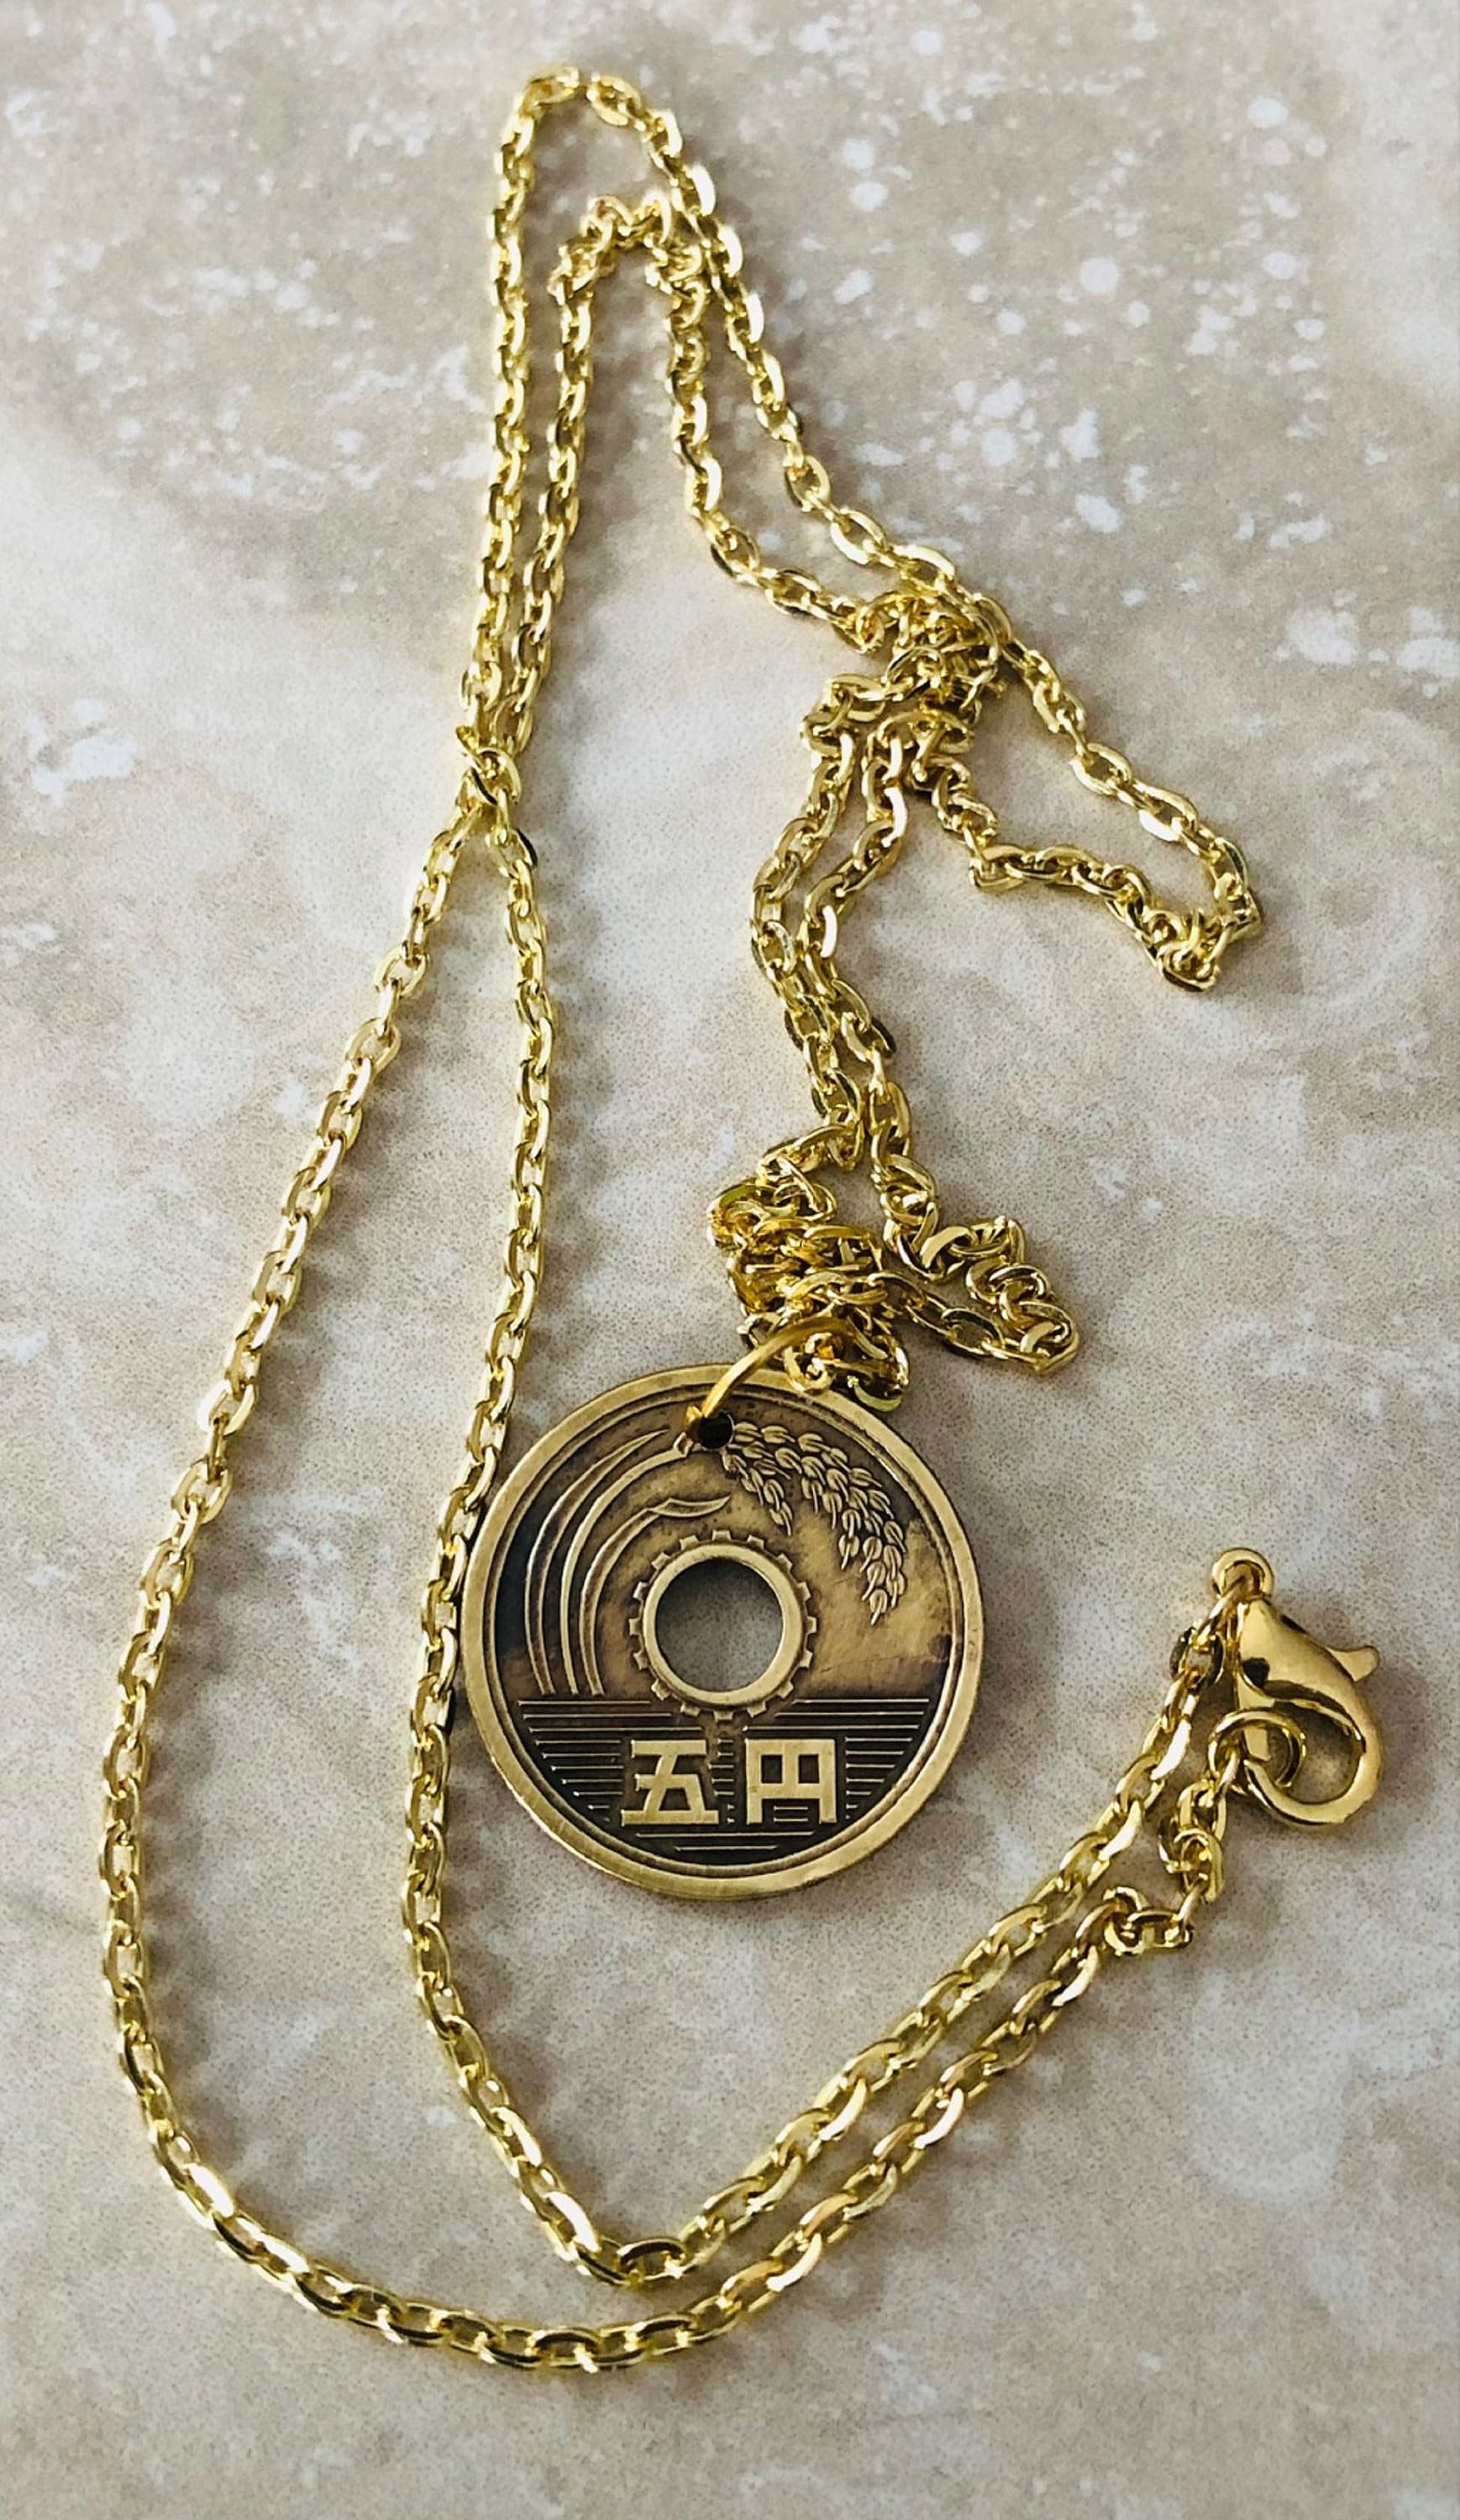 Japan Coin Necklace 5 Yen Pendant Japanese Vintage Rare Jewelry Coins Coin Enthusiast Fashion Accessory Handmade